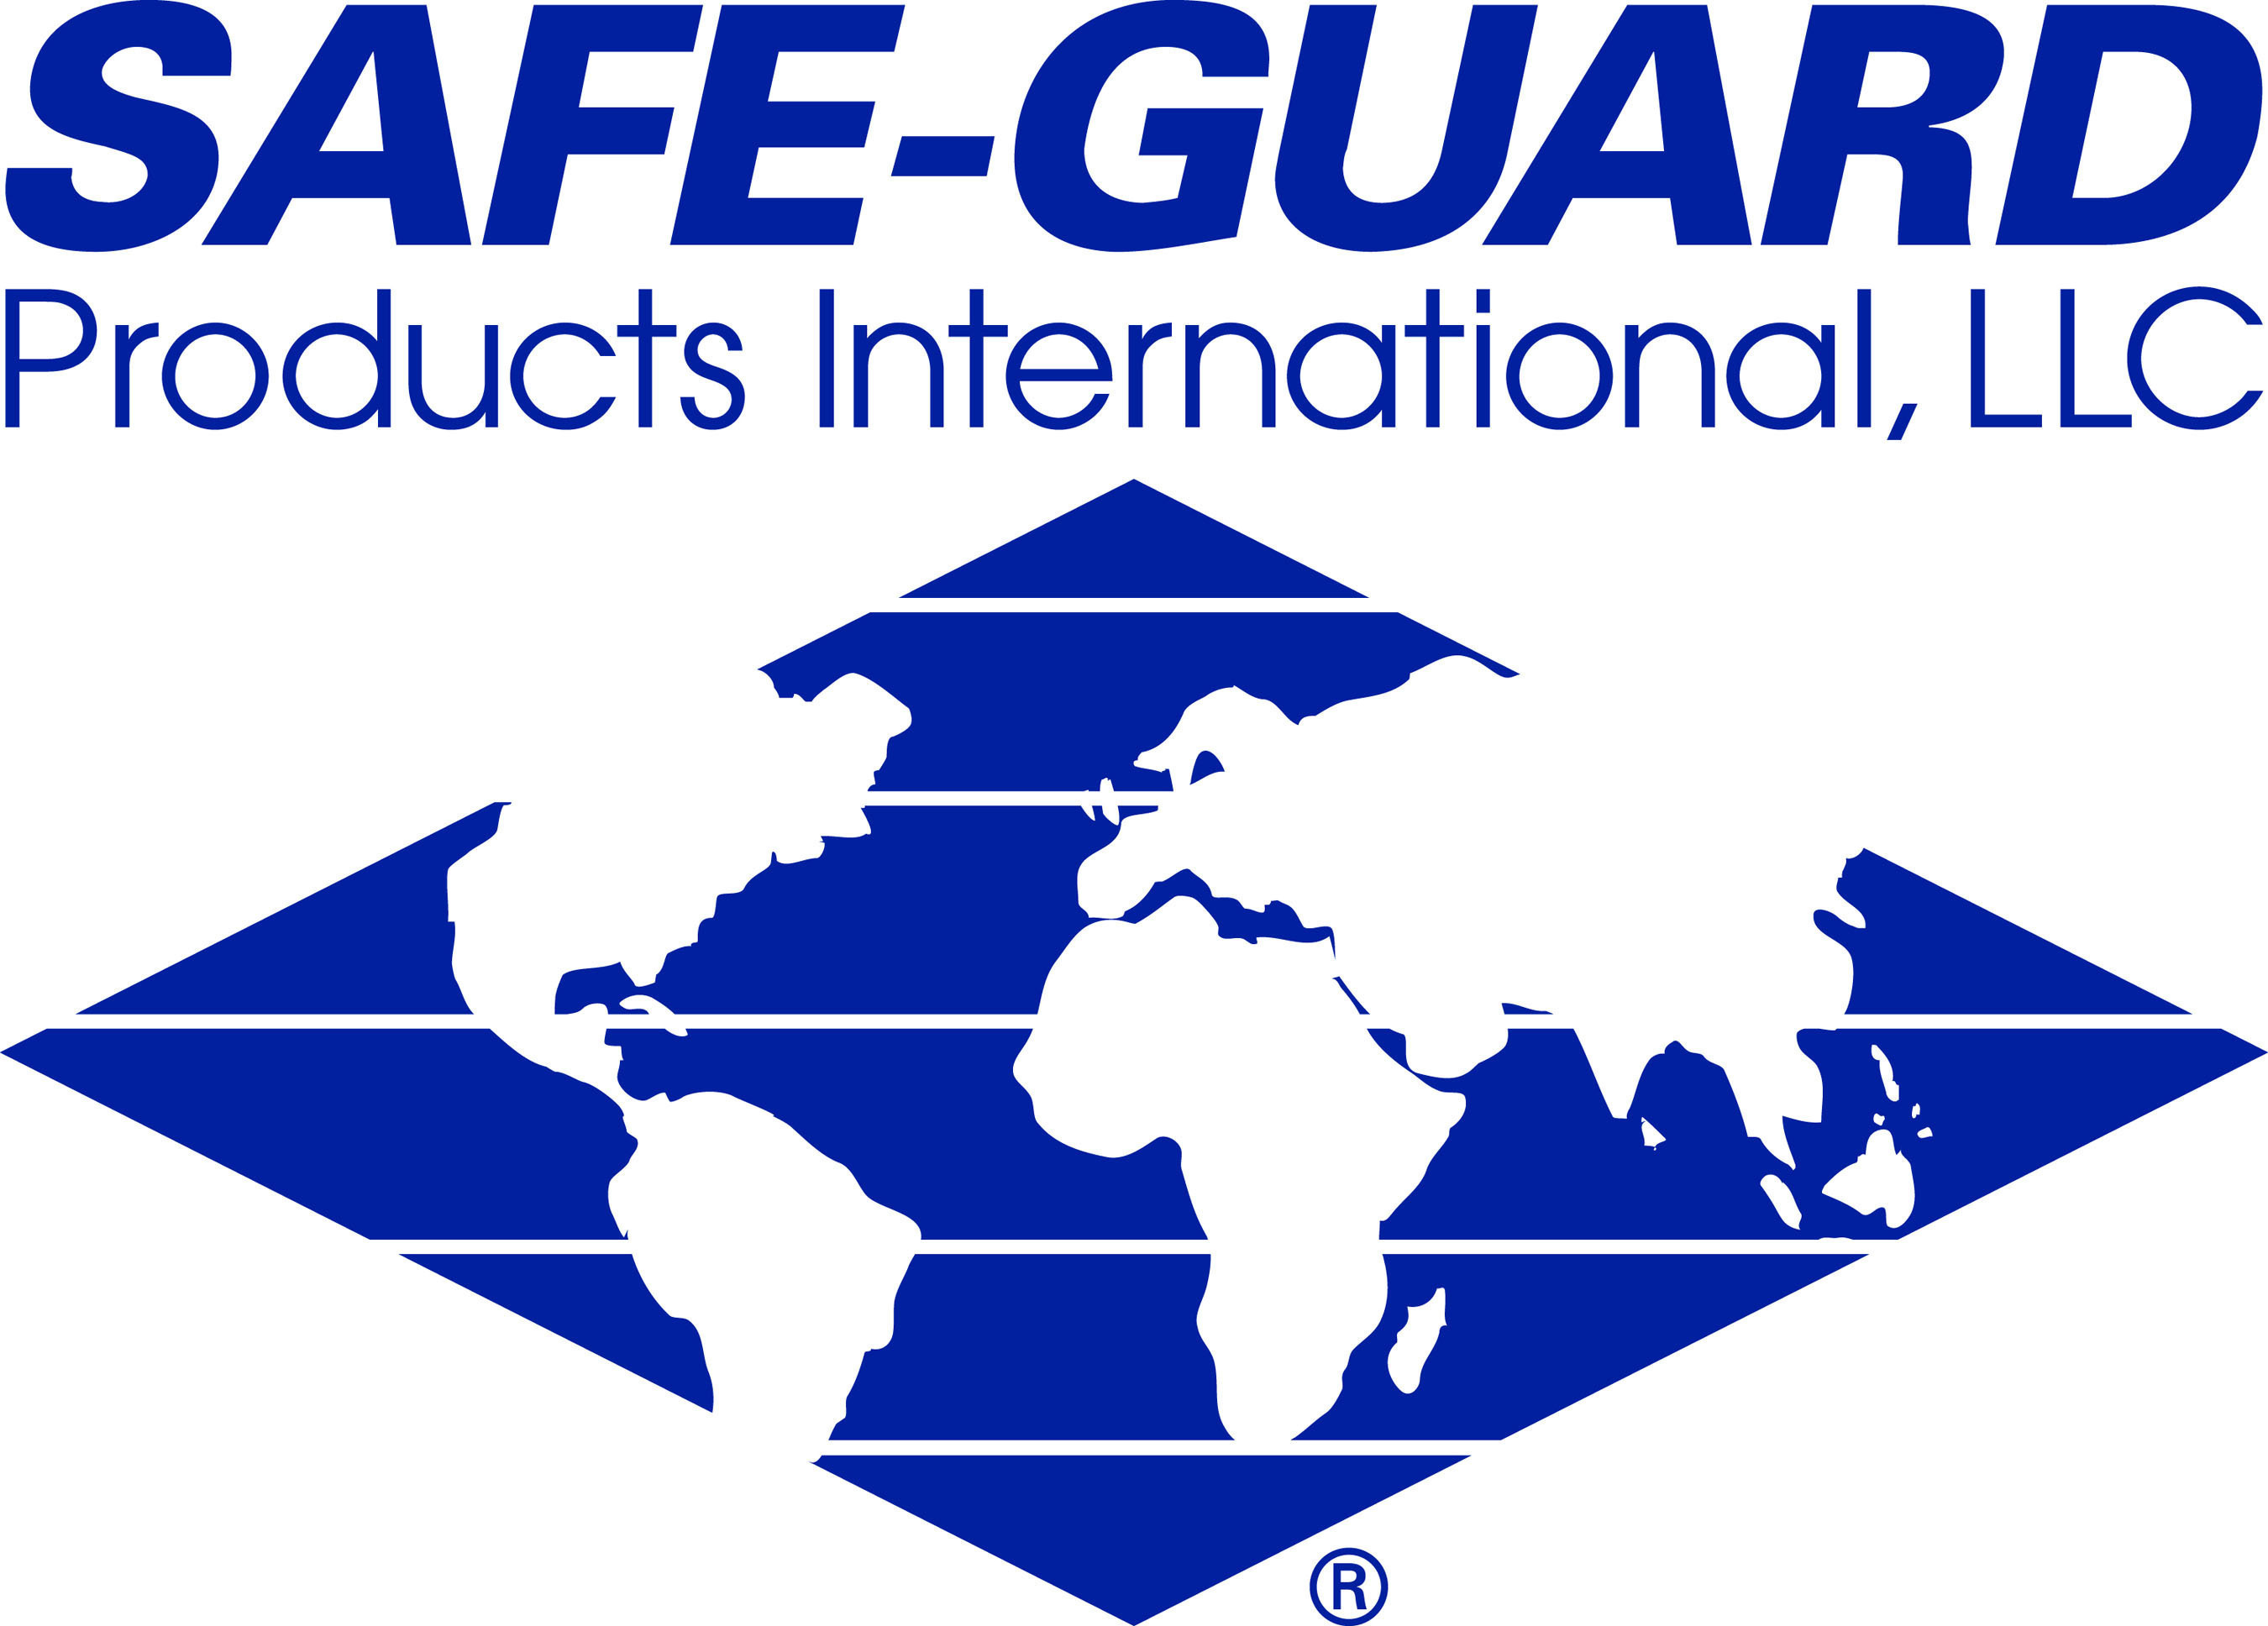 Safe-Guard Products International is the leading provider of Finance and Insurance products in the automotive aftermarket industry.